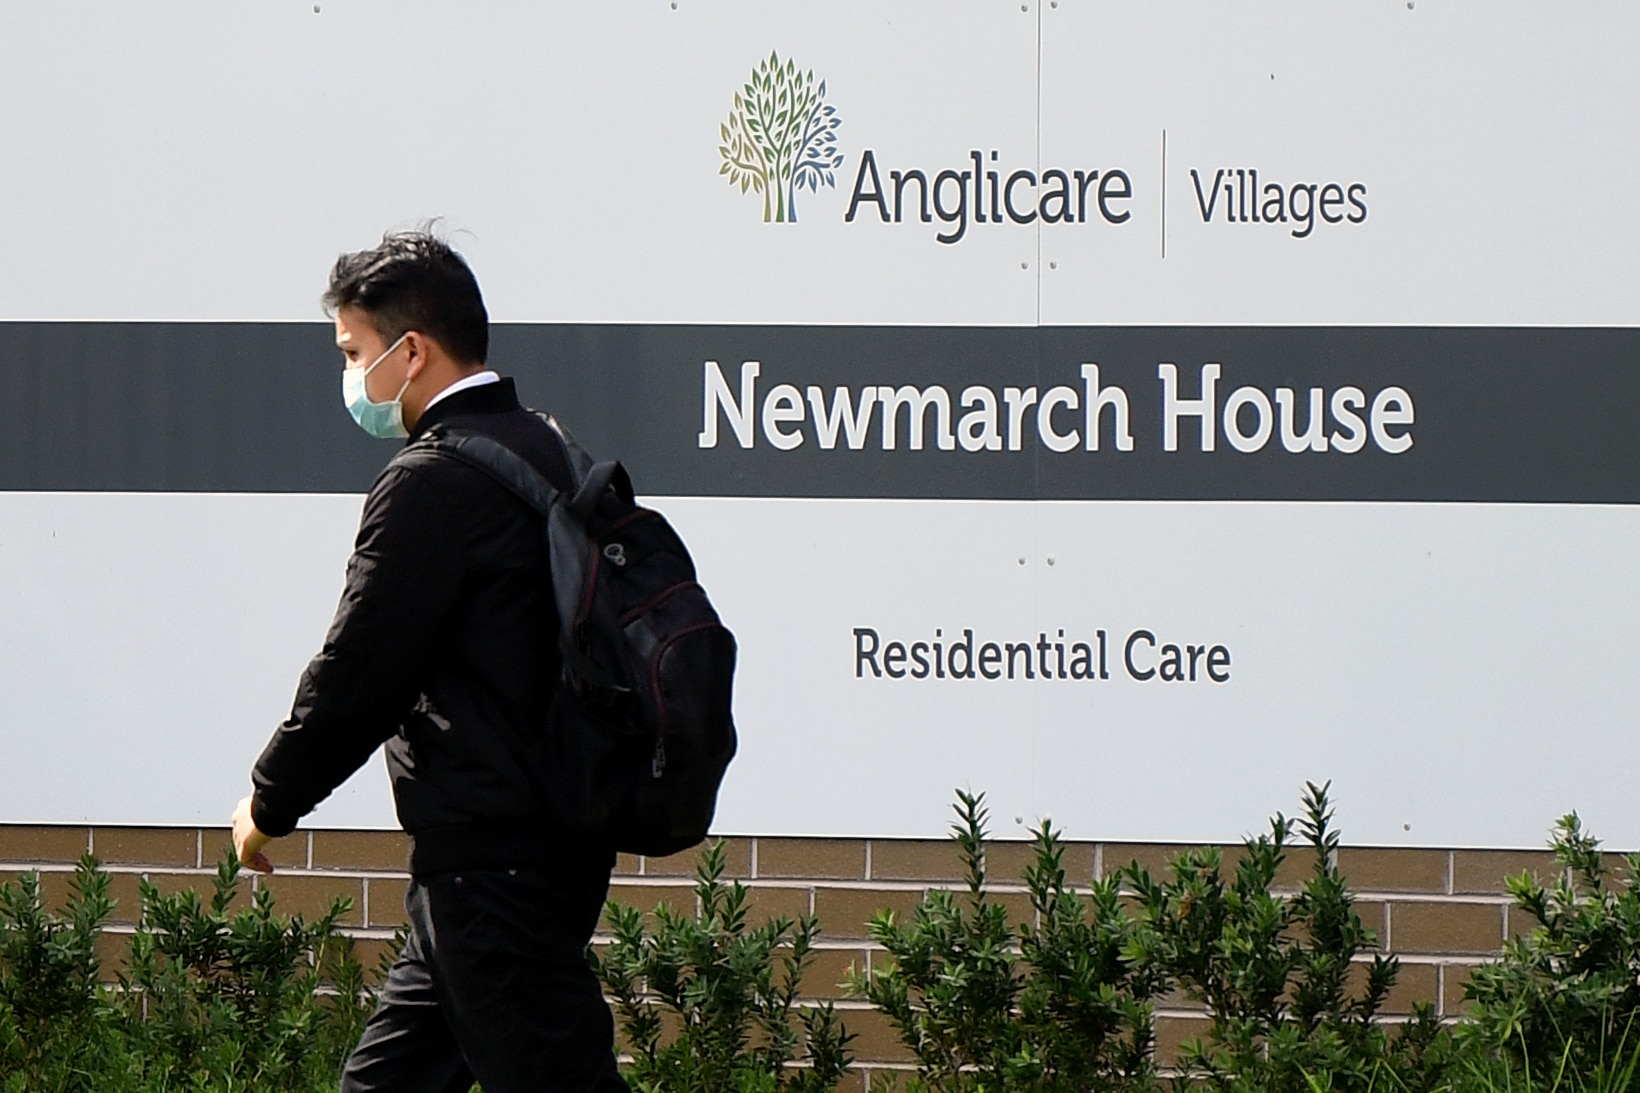 Eleven residents have now died from COVID-19 at the Anglicare Newmarch House in Western Sydney.